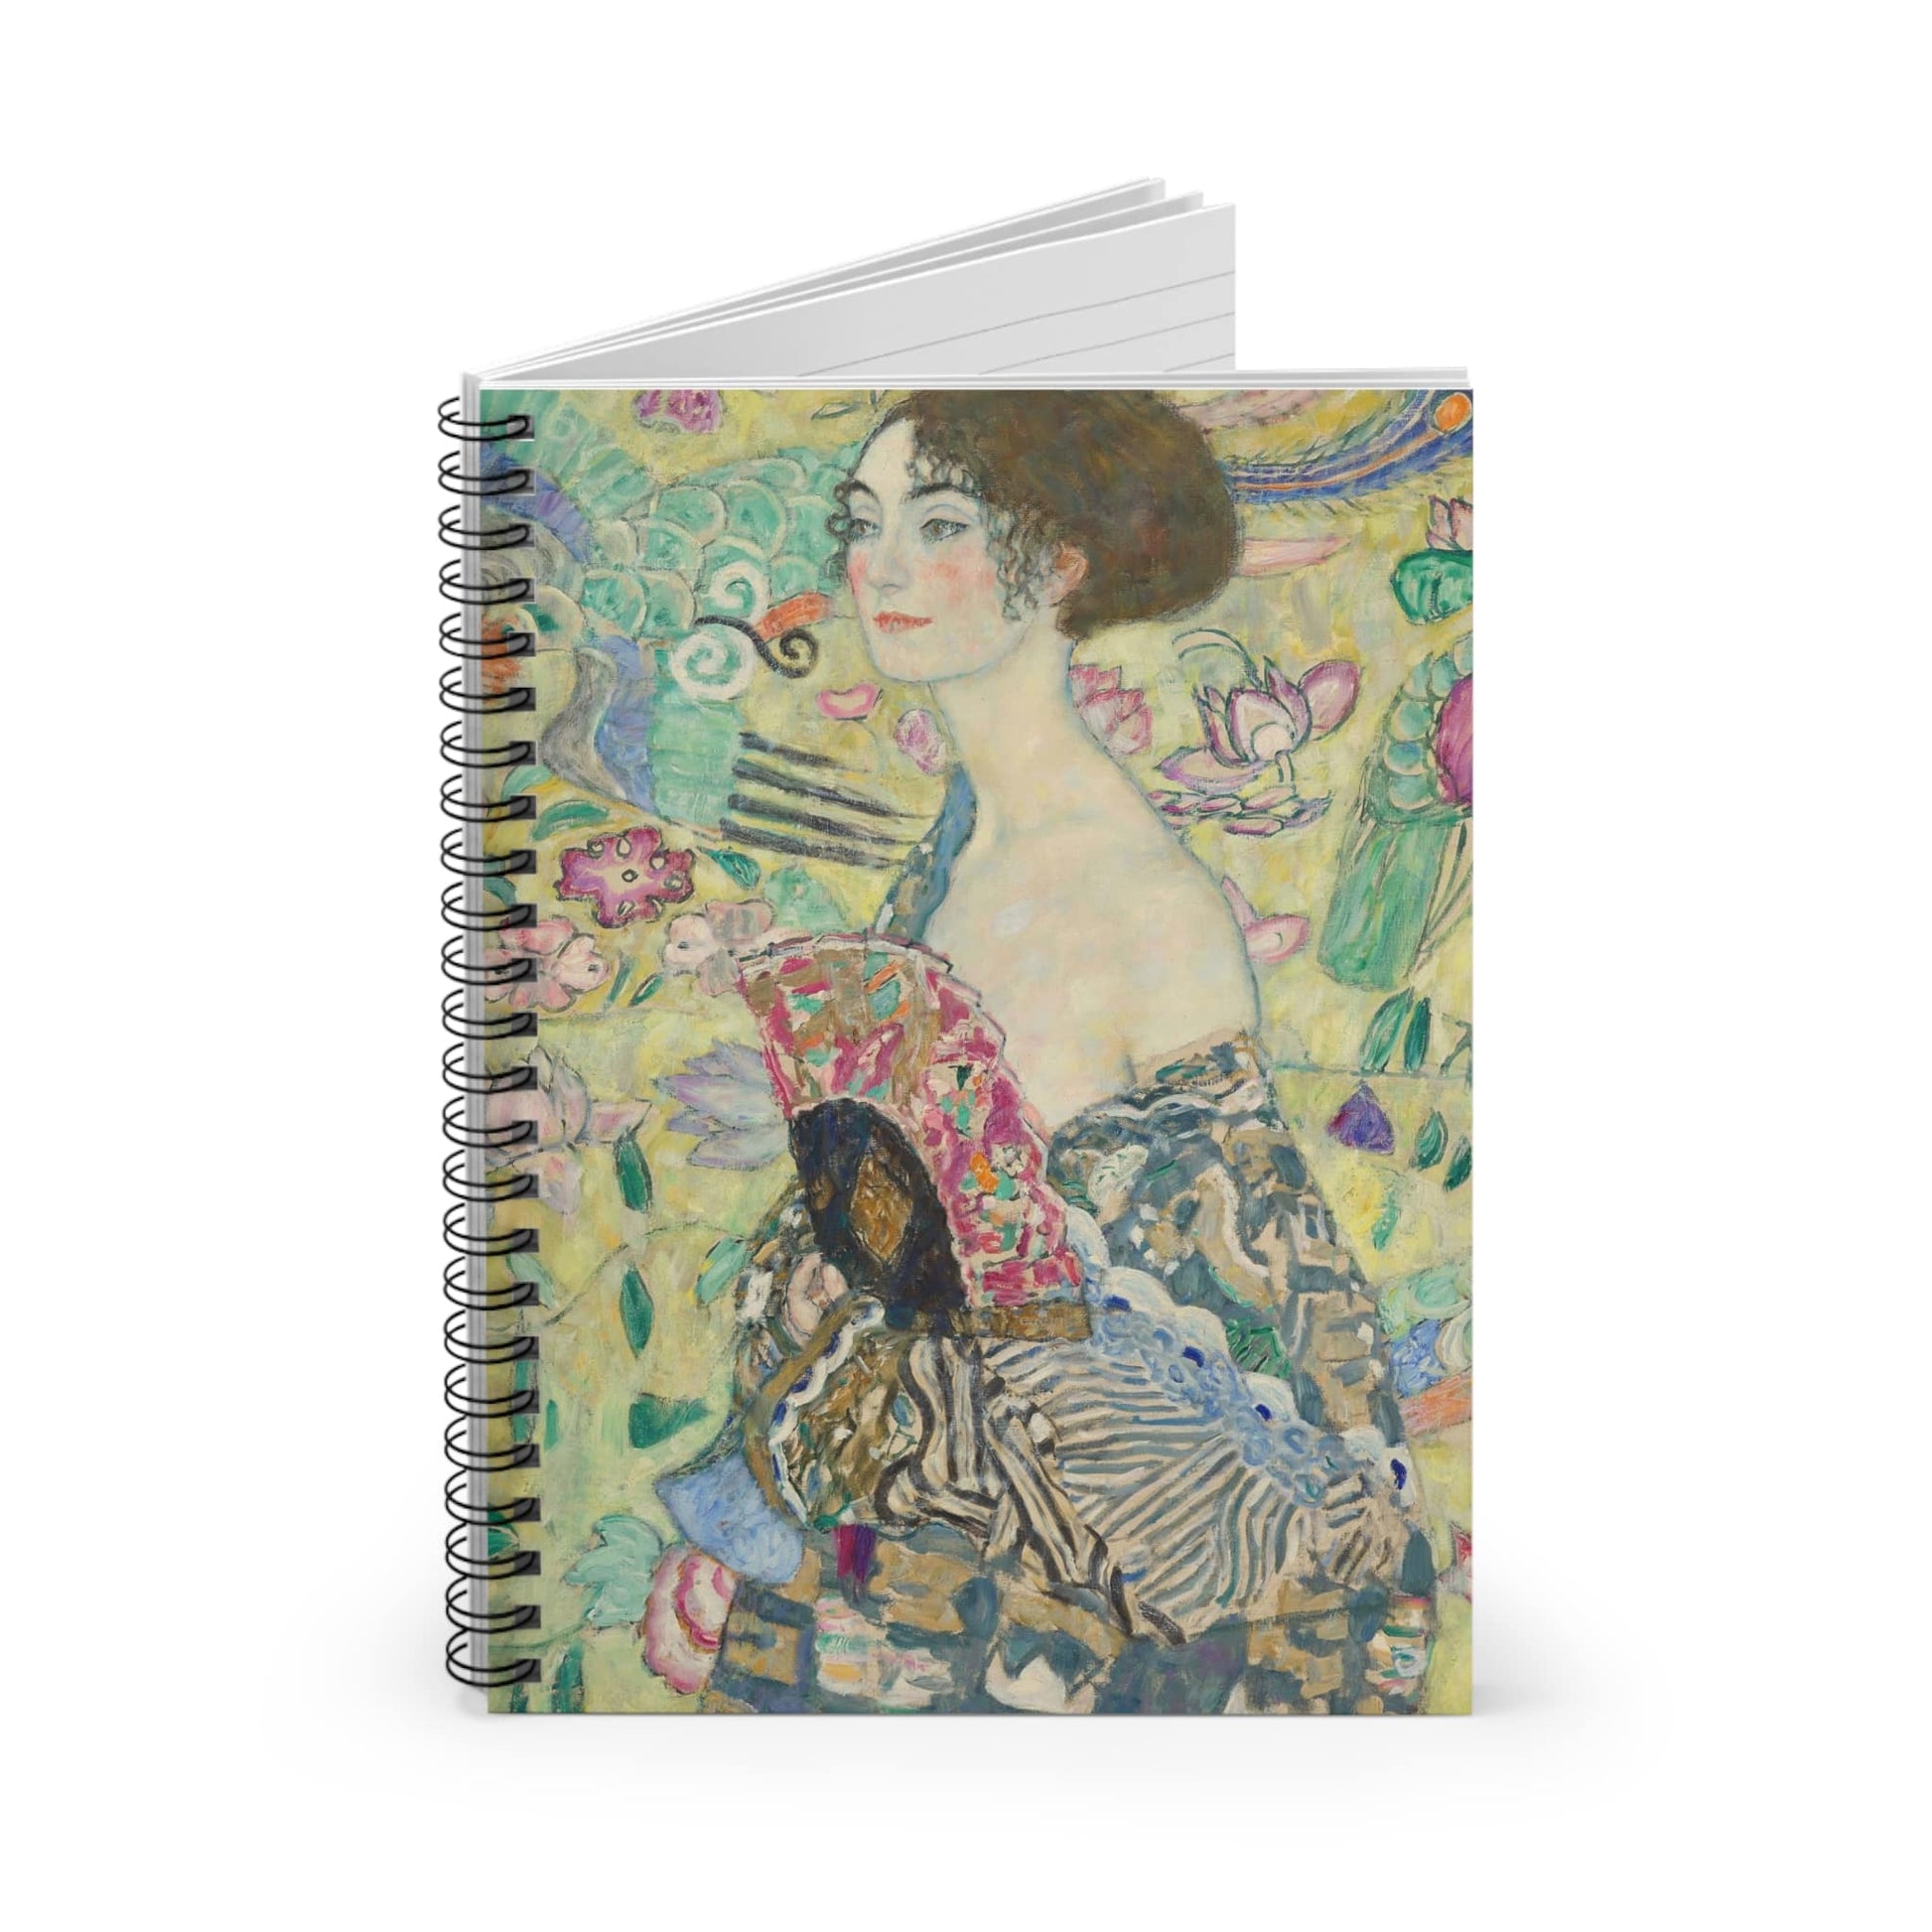 Whimsical Spiral Notebook Standing up on White Desk